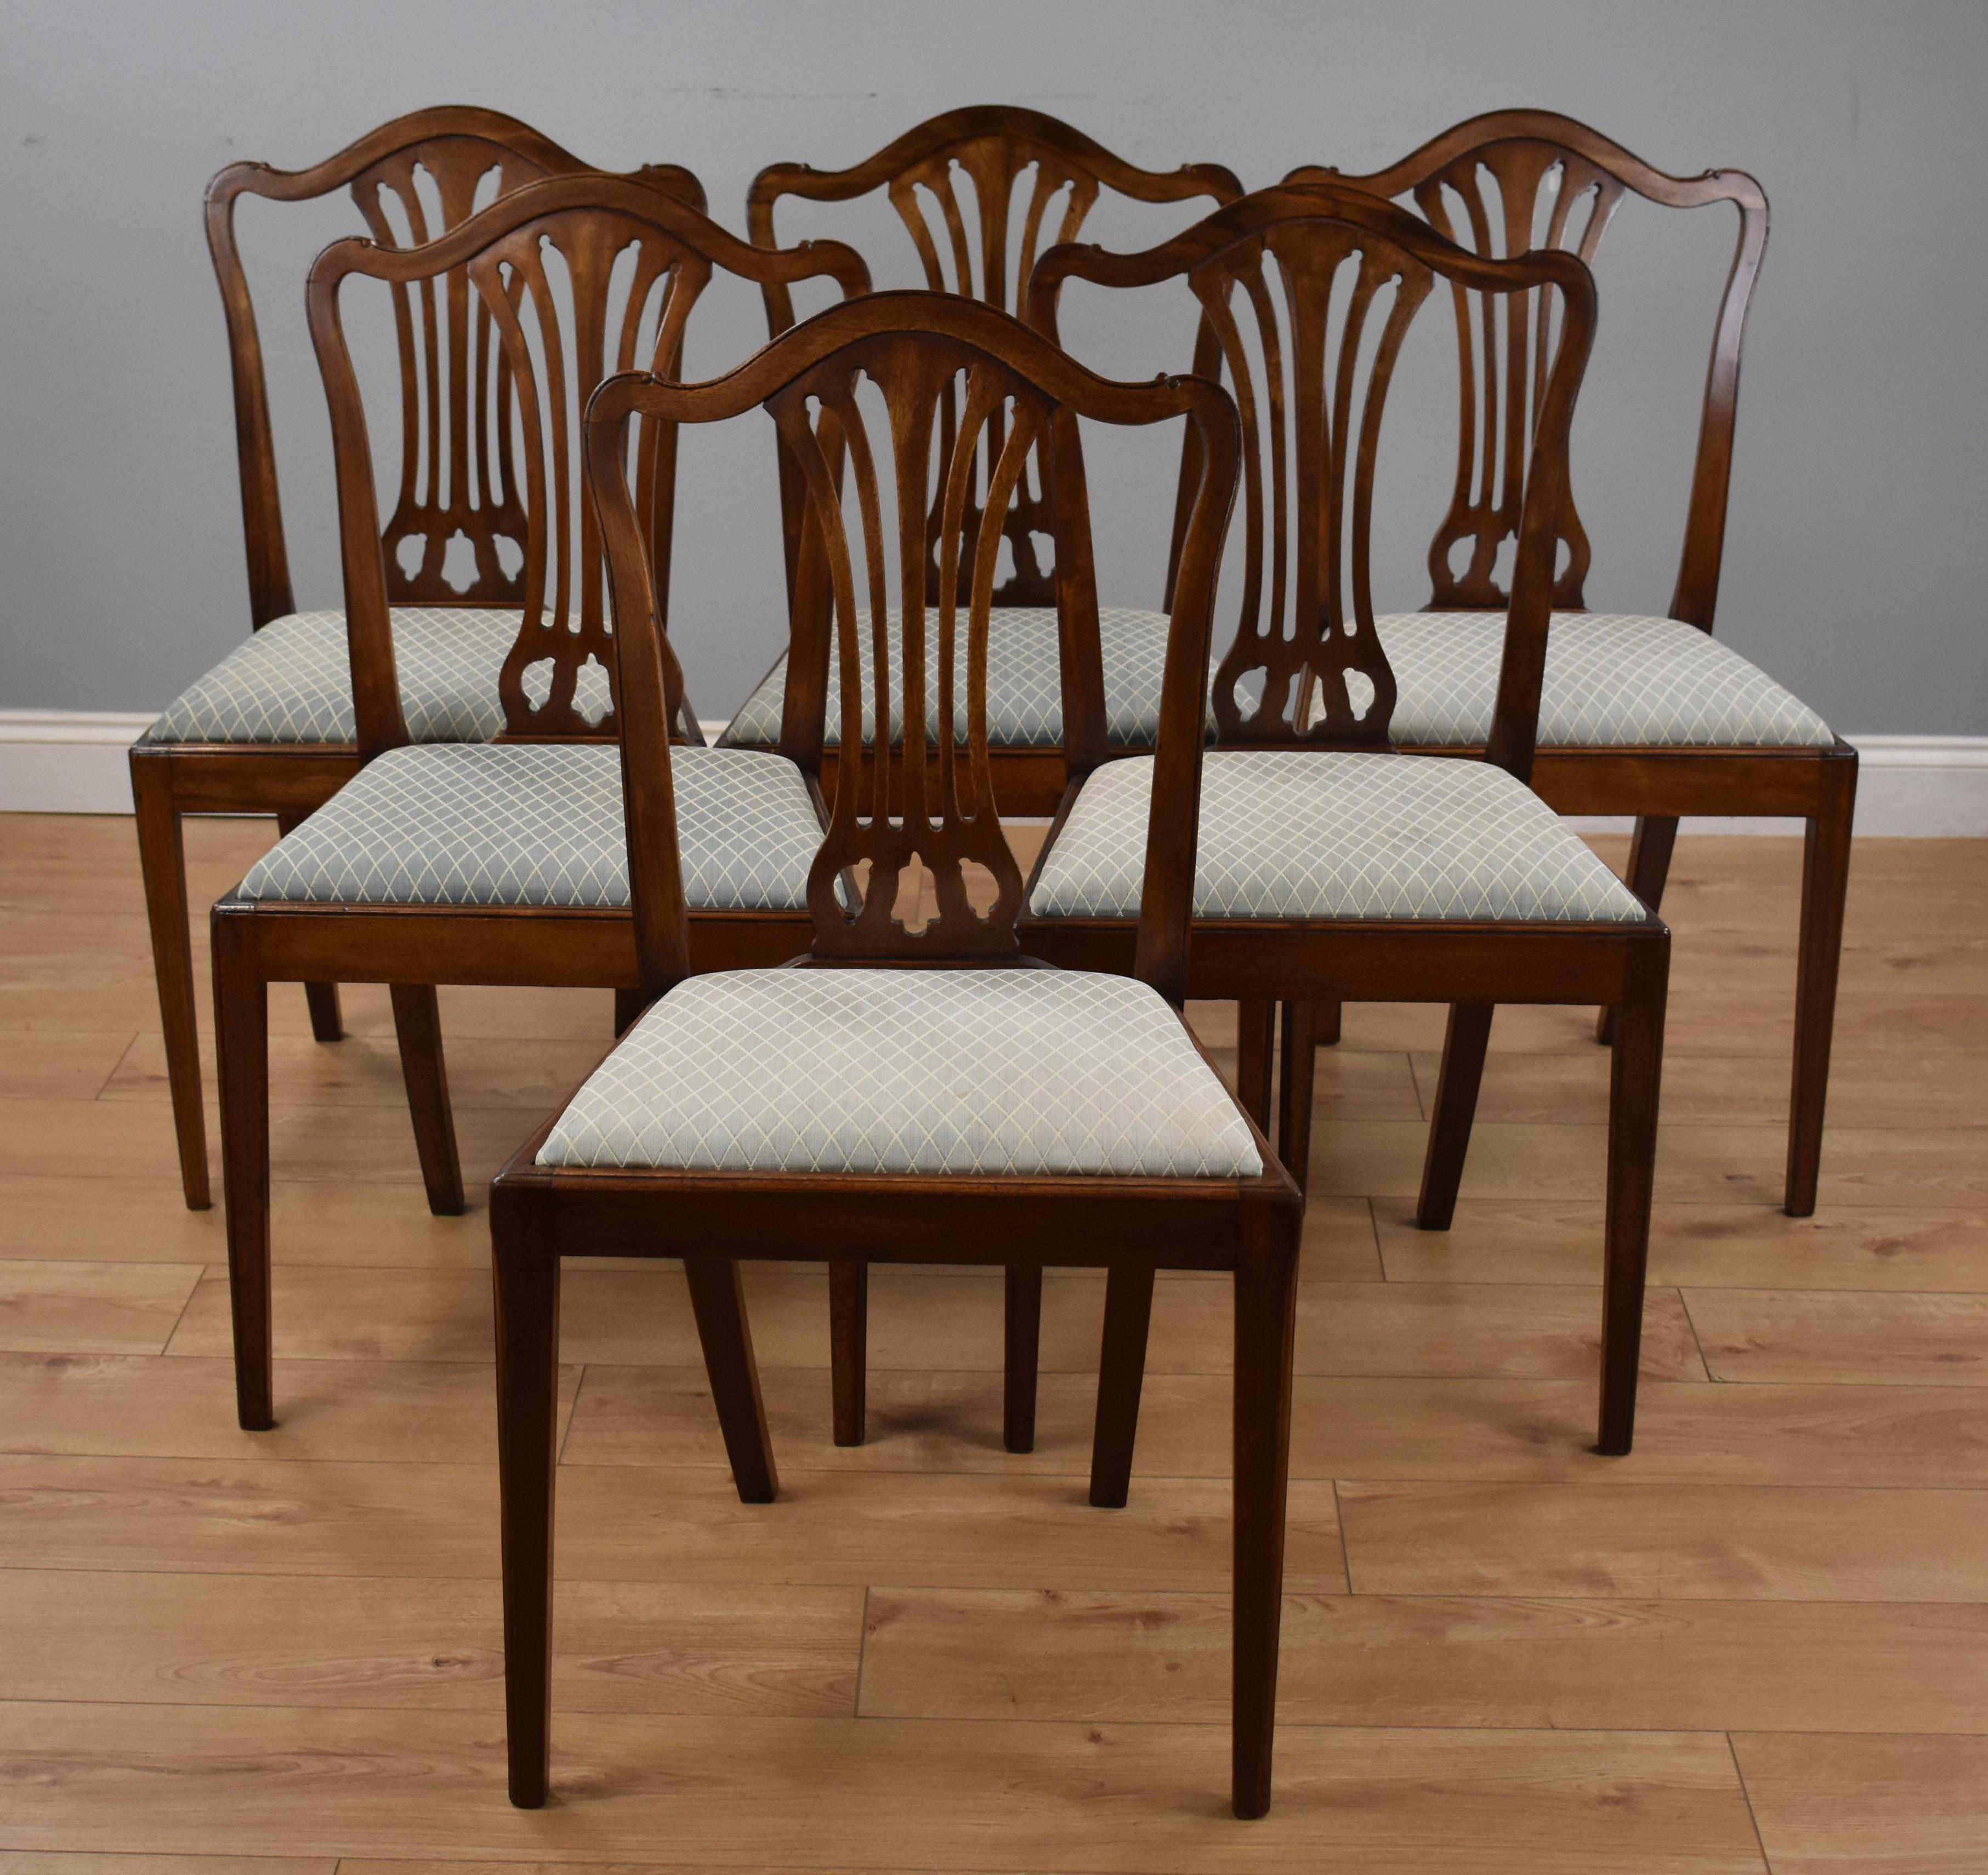 Set of eight 19th century mahogany dining chairs in good condition having been recently polished, all chairs are structurally sound and have drop in seats which would benefit from being recovered. The set consists of six singles and two carver